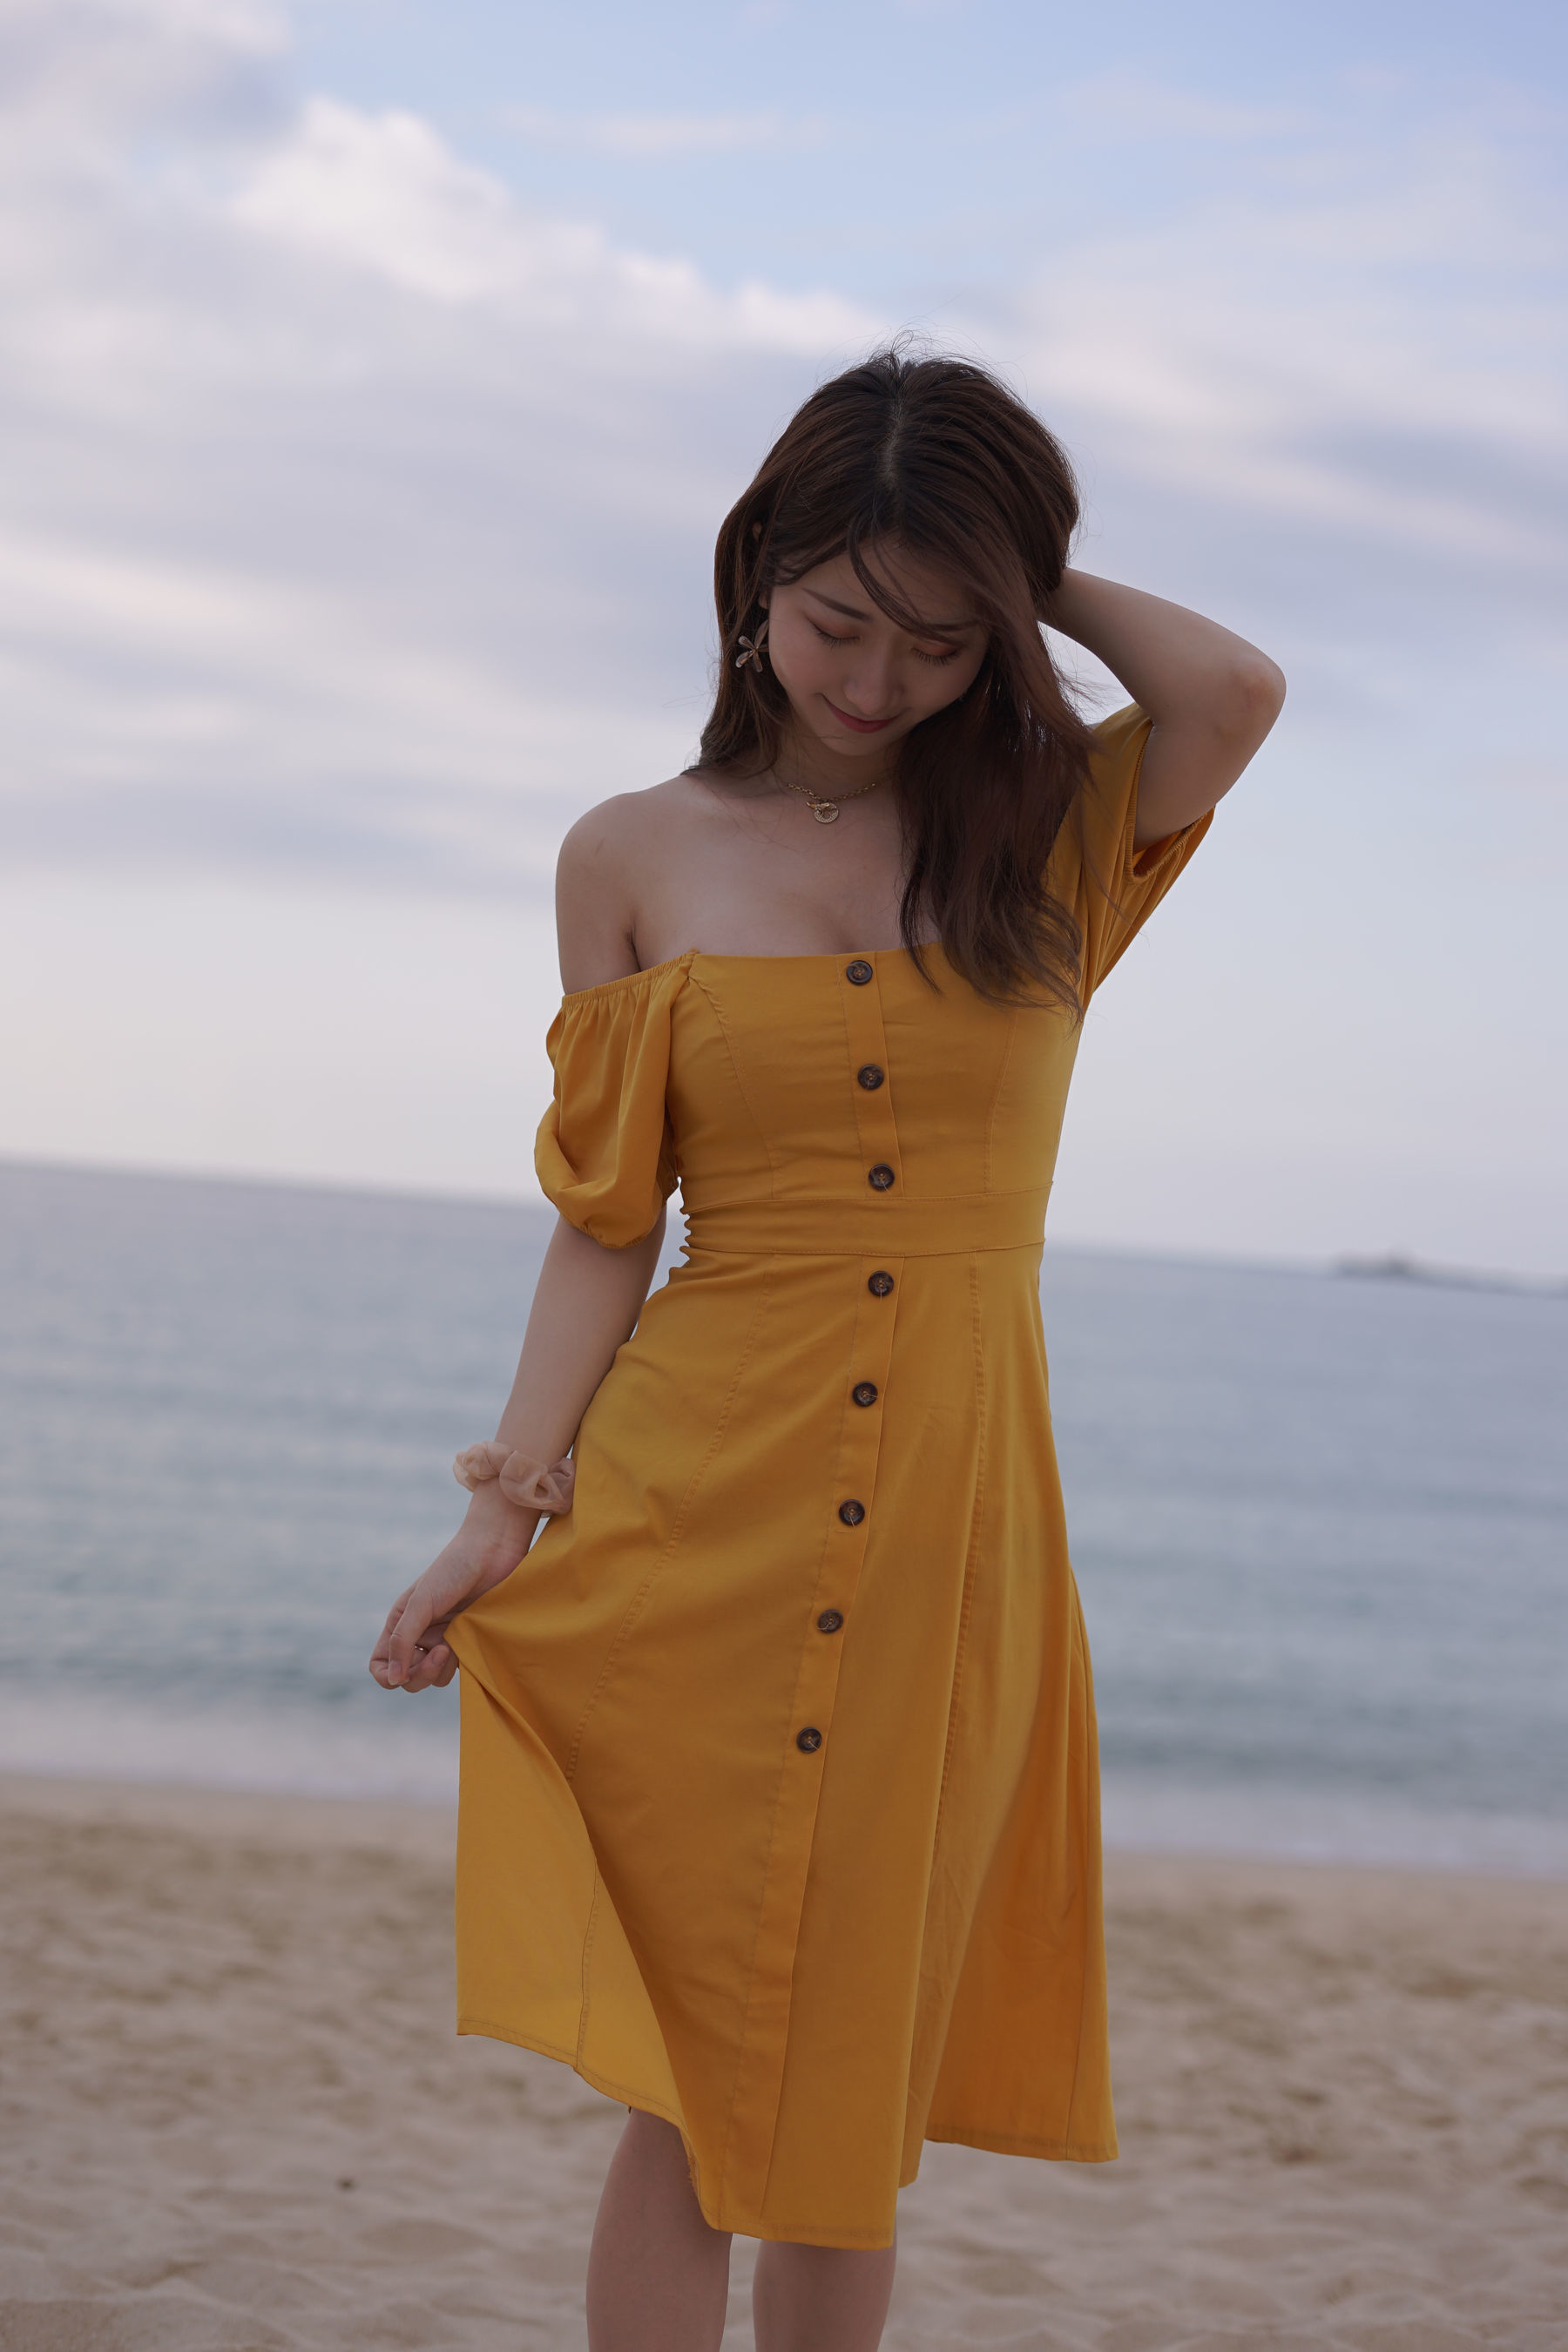 Popular Coser Holland “Island Tour Yellow Dress” Photo Collection